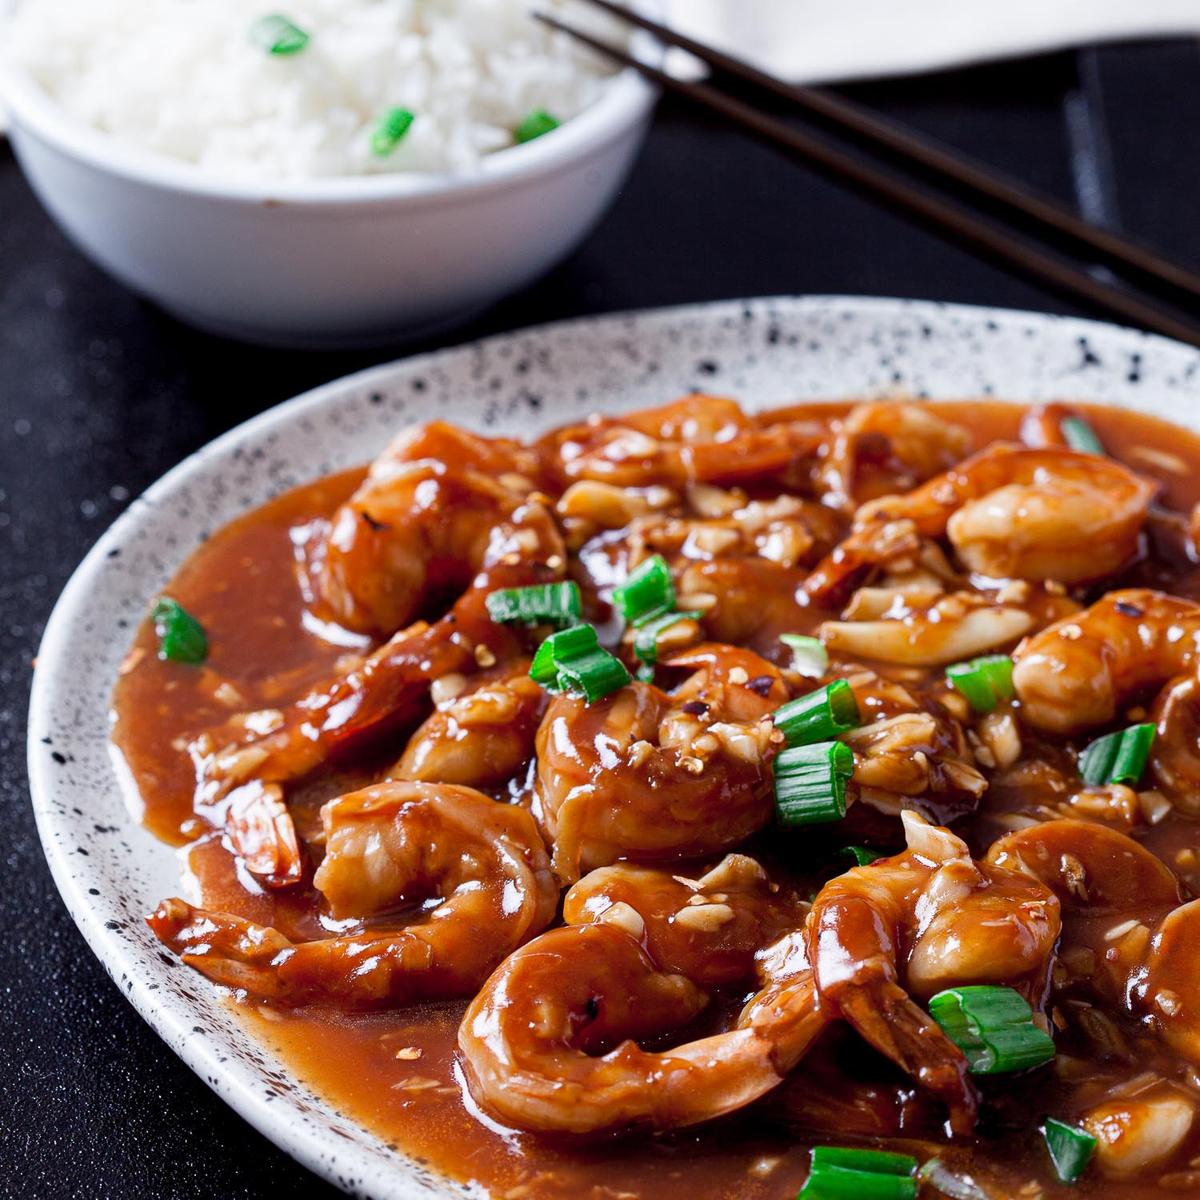 Szechuan shrimp is a filling meal that’s easy to make at home, healthy, and teeming with flavor. (Courtesy of Amy Dong)